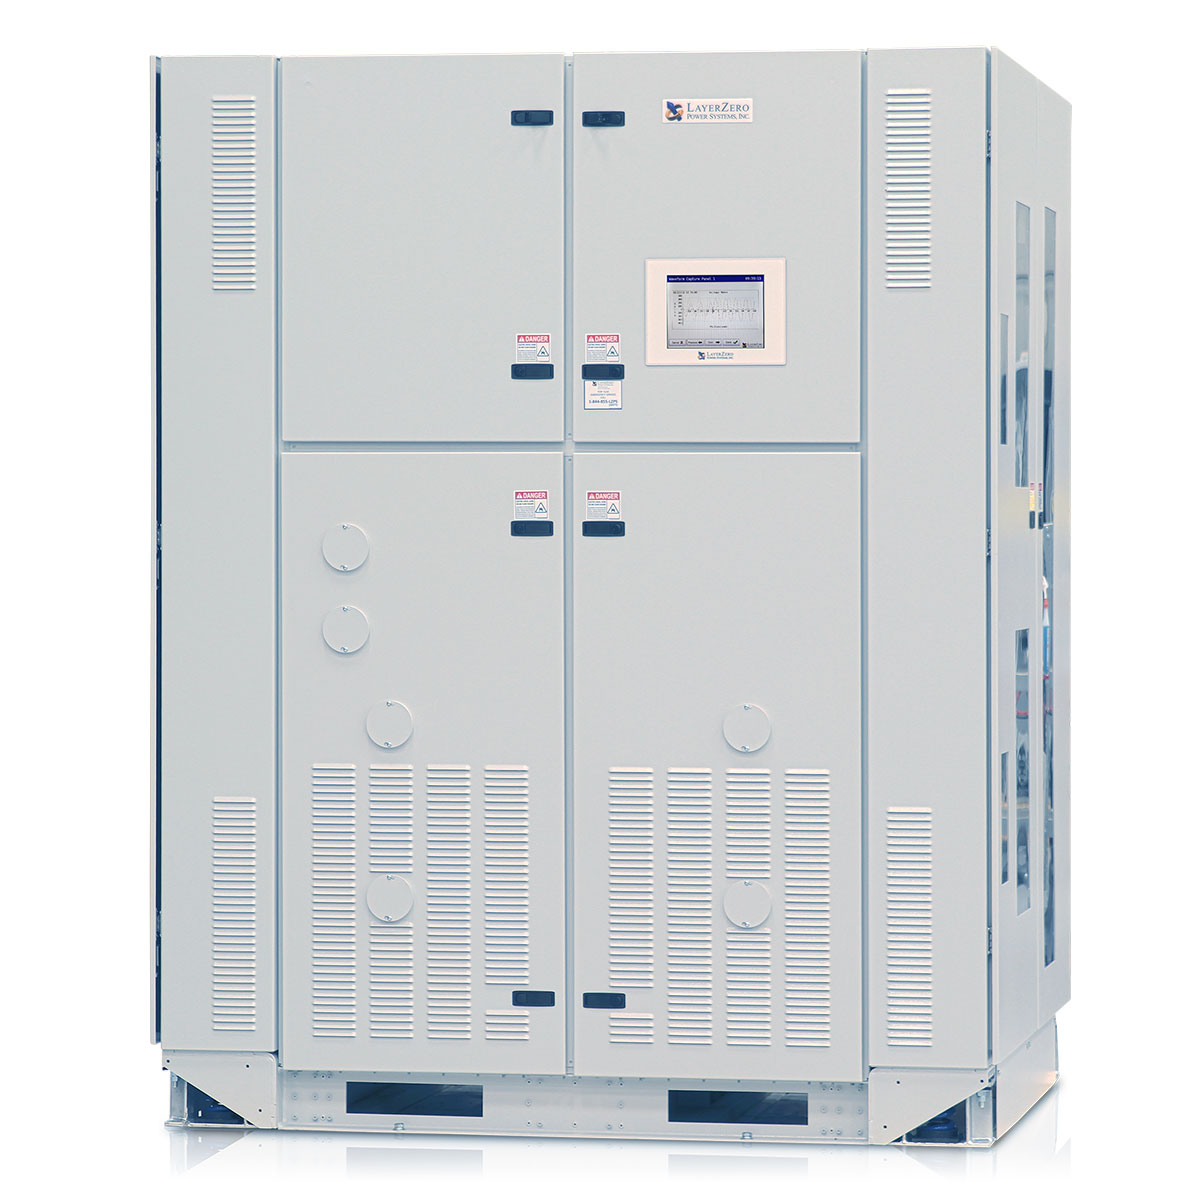 The LayerZero Series 70 ePODs: Type-XL Power Distribution Unit (PDU) with 42-Circuit SafePanels plus Subfeed Distribution Angle.